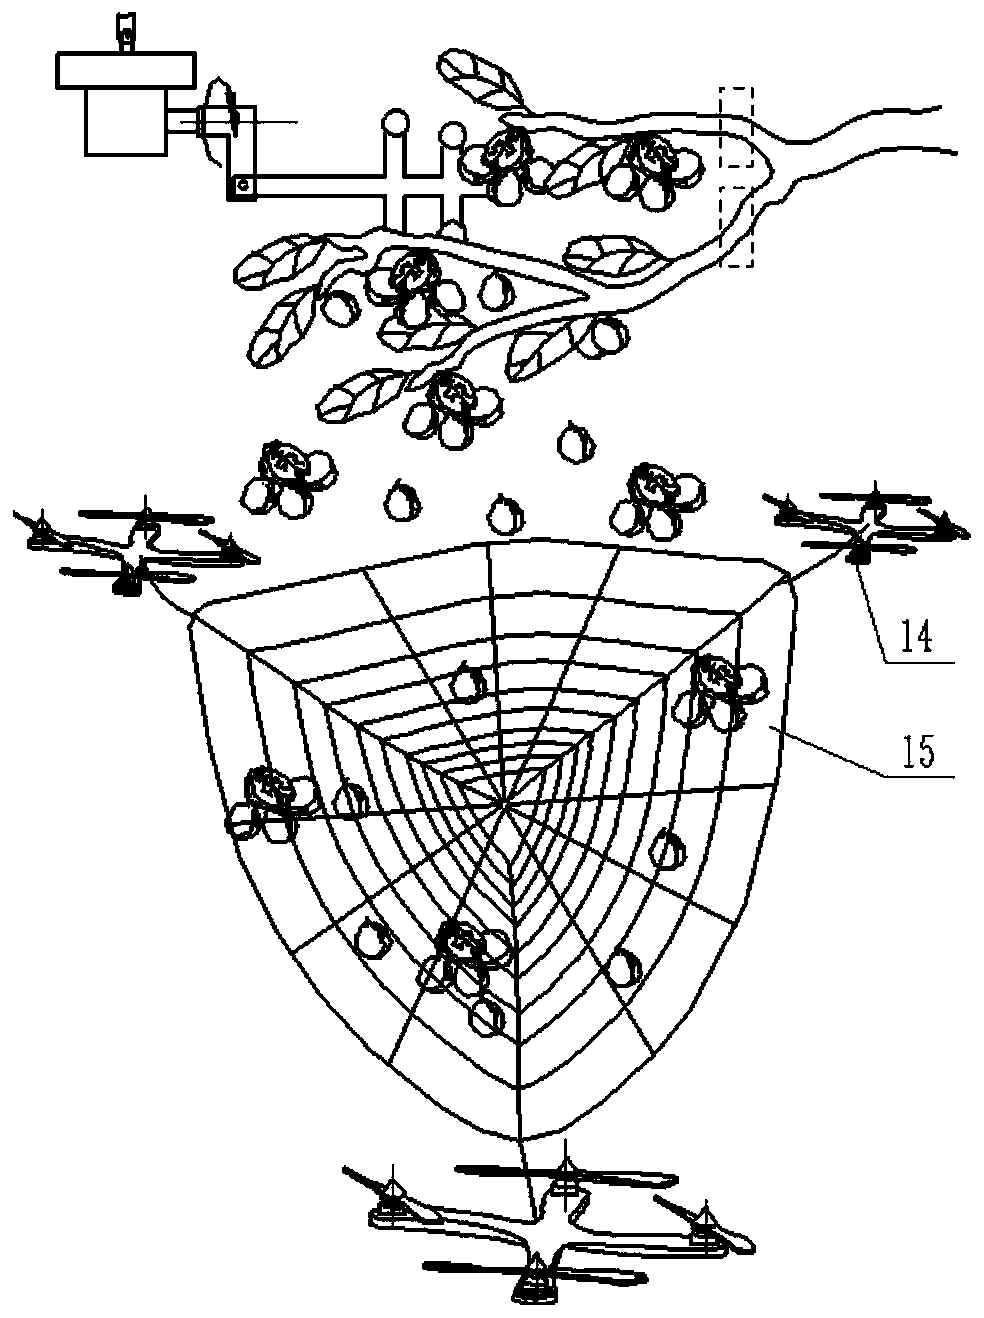 Chinese walnut picking and collecting device and method based on unmanned aerial vehicle